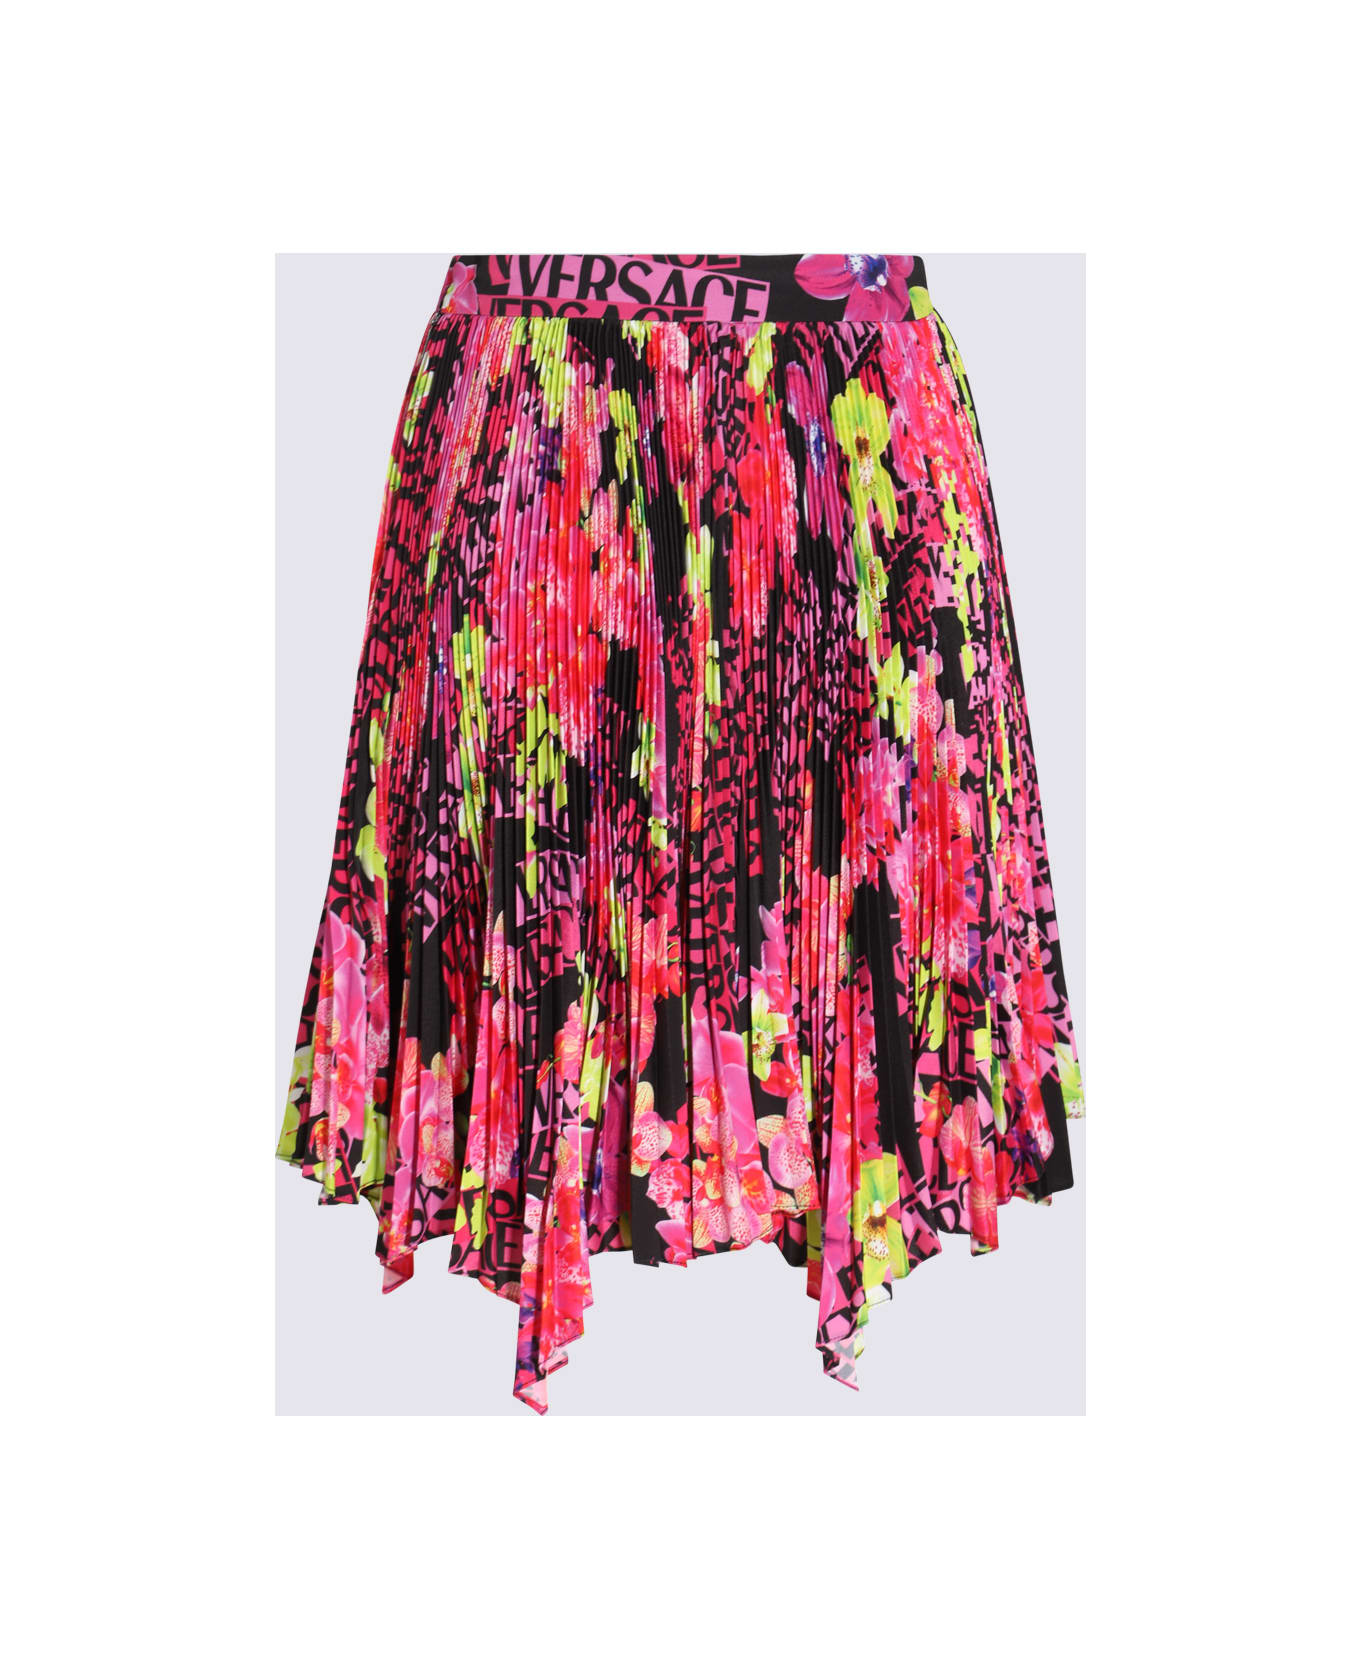 Versace Multicolour Pleated Skirt - ORCHID VERSACE